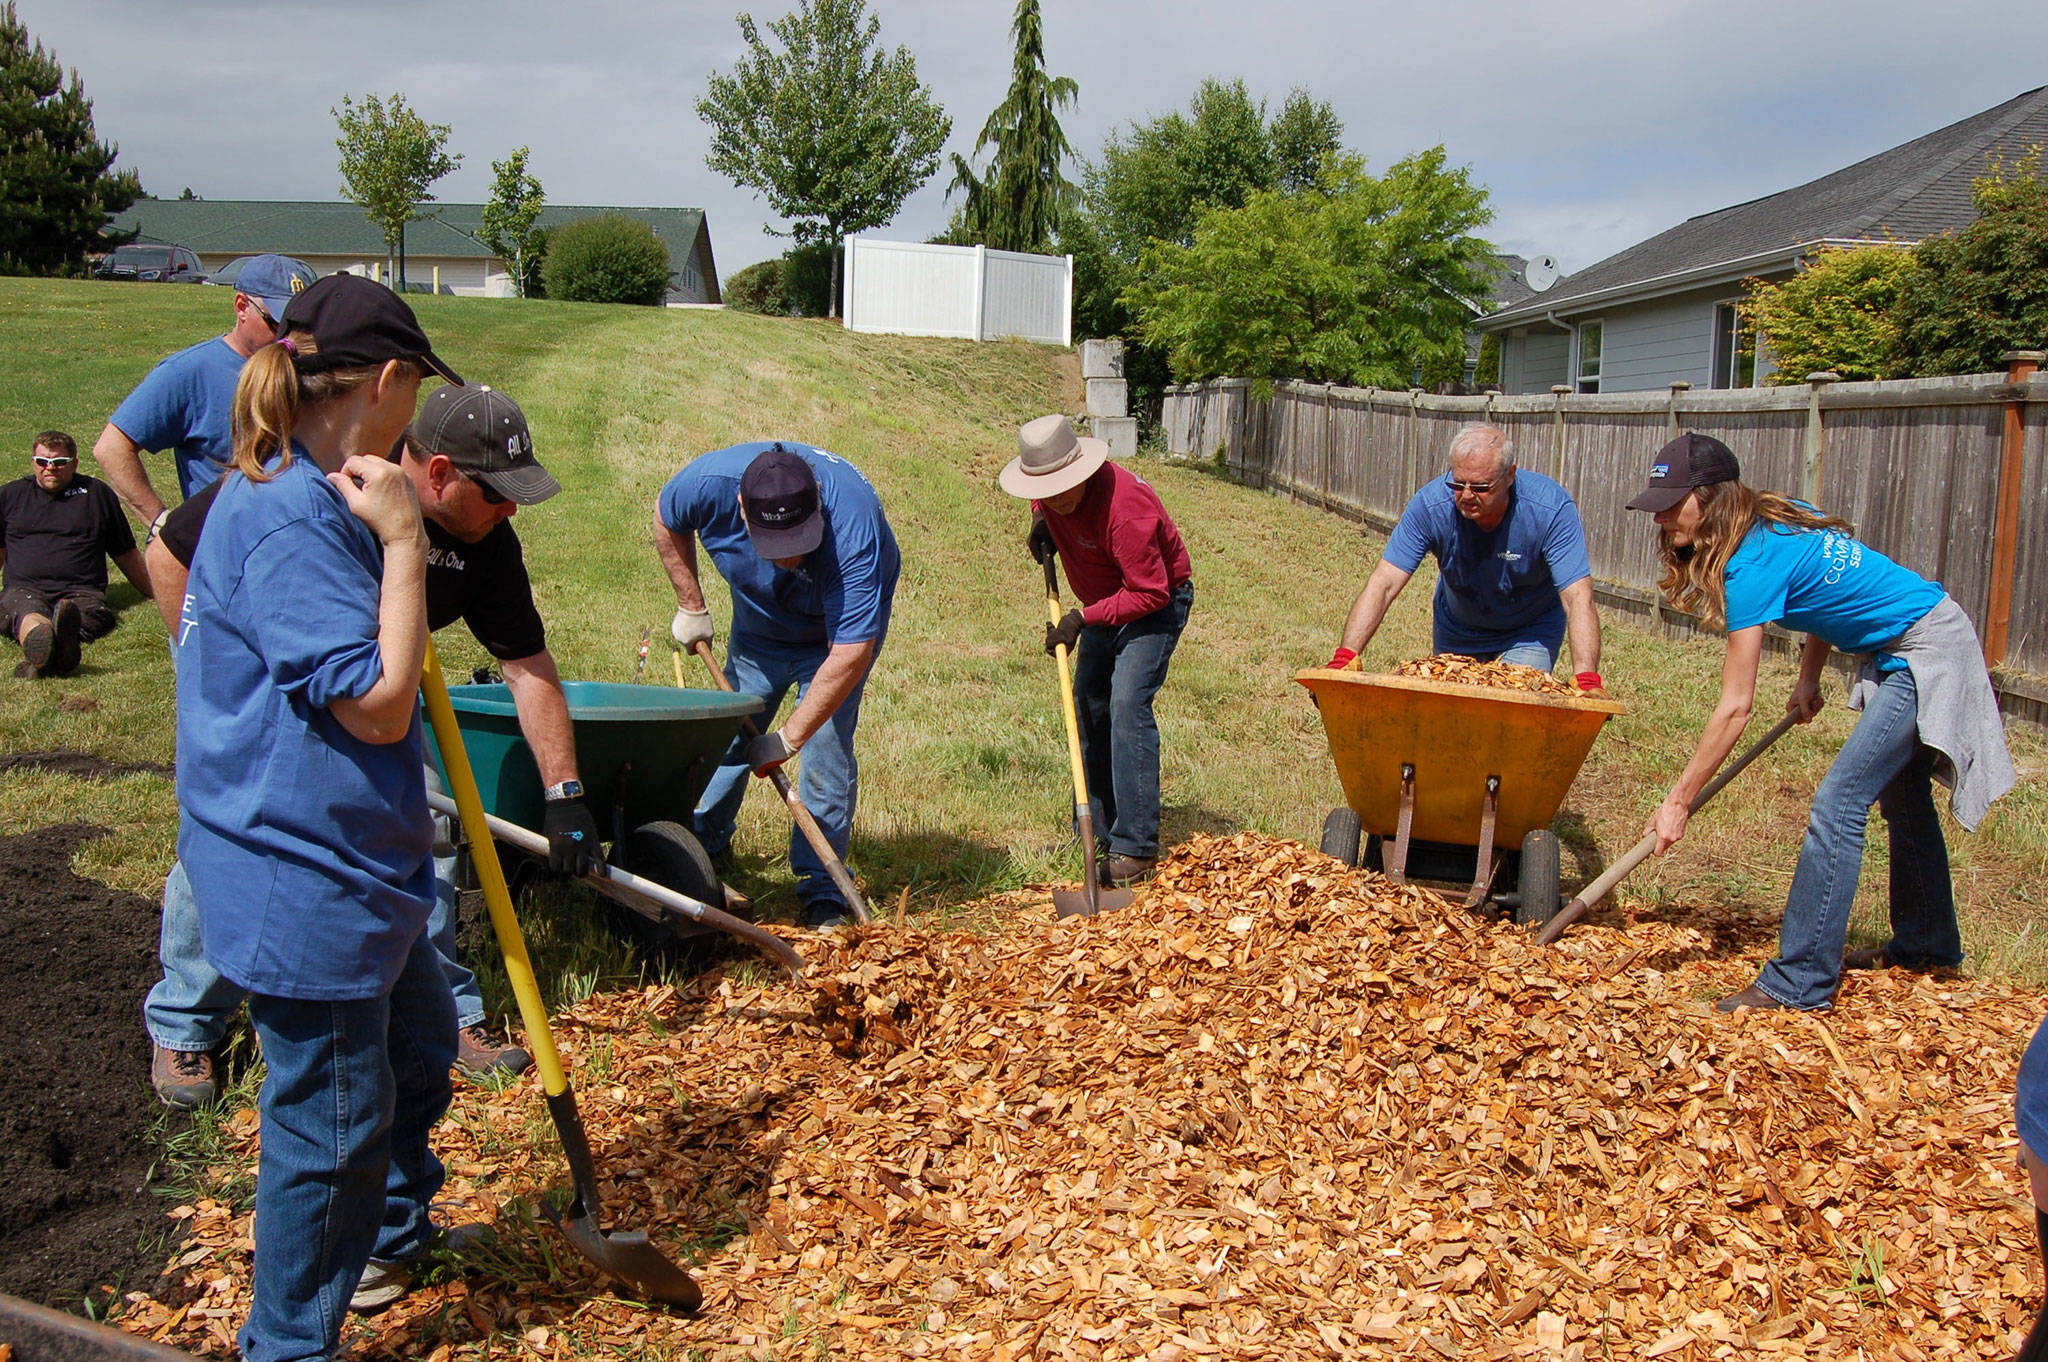 A group of Windermere brokers, All in One and Cascade Bark volunteers raked and shoveled wood chips into wheelbarrows before they poured them in the new community garden rebuilt at Sunbelt Apartments. (Erin Hawkins/Olympic Peninsula News Group)